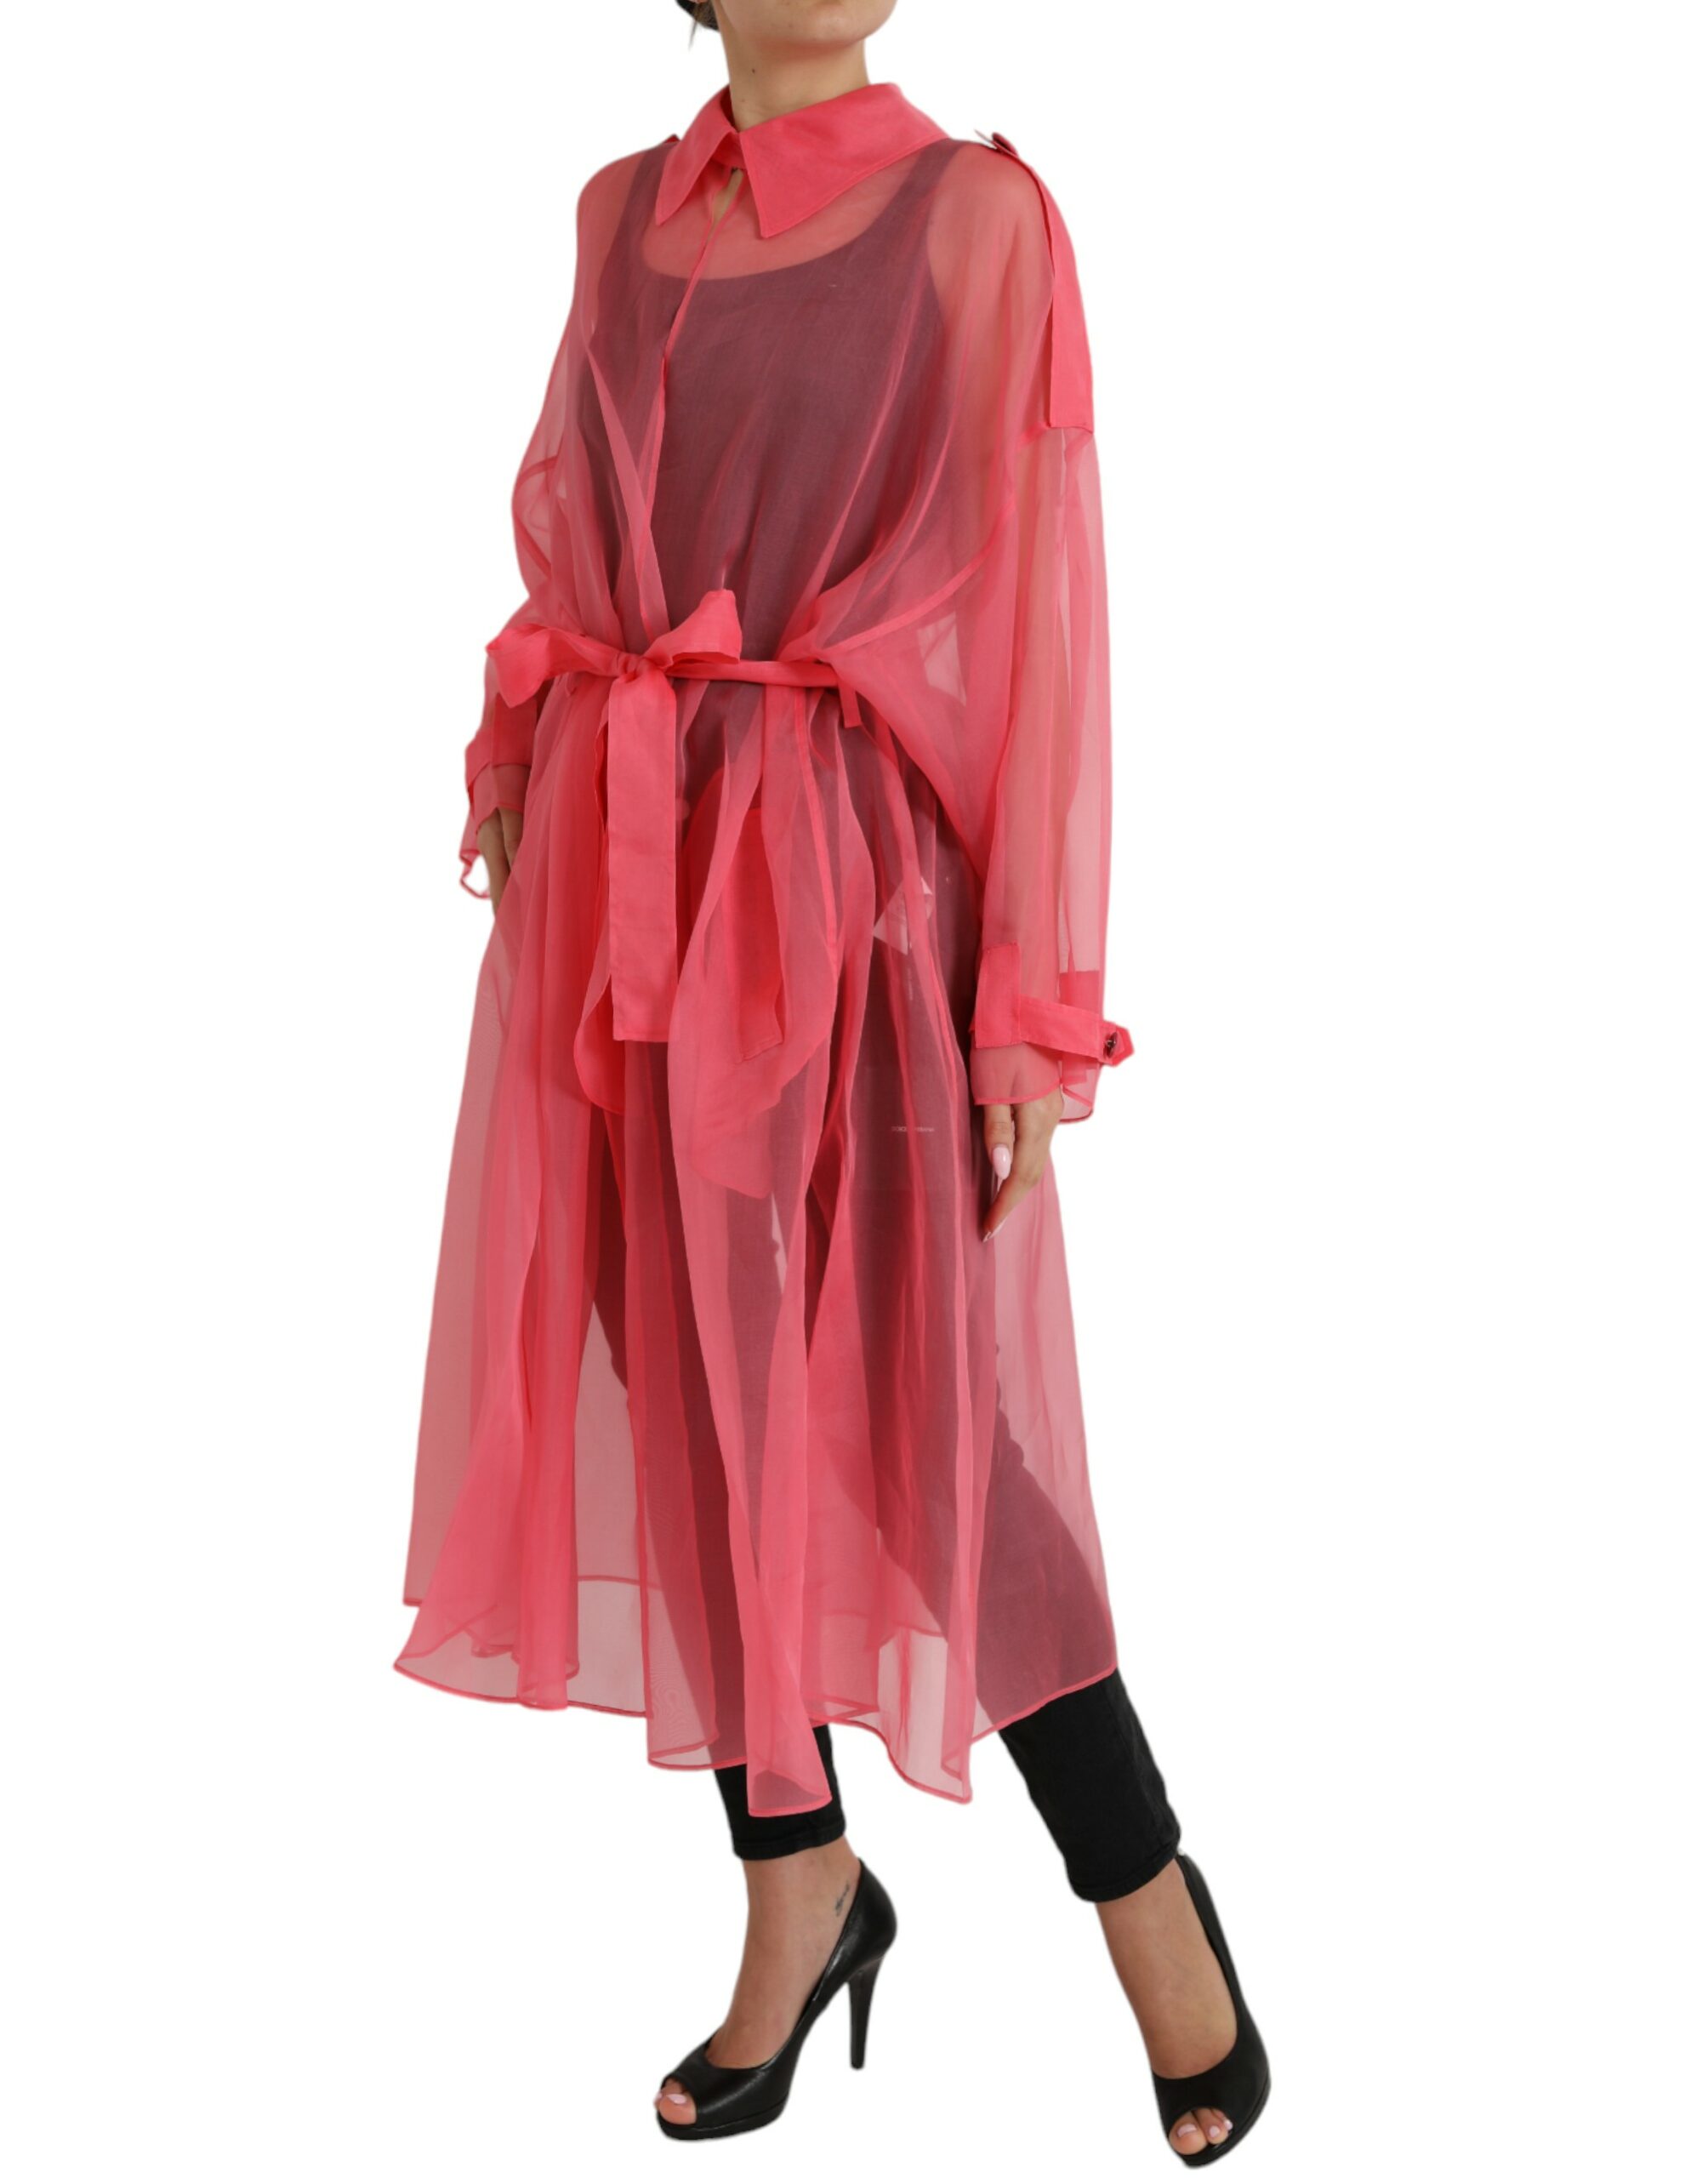 Silk Long Jacket with Belted Waist and Drawstring Closure